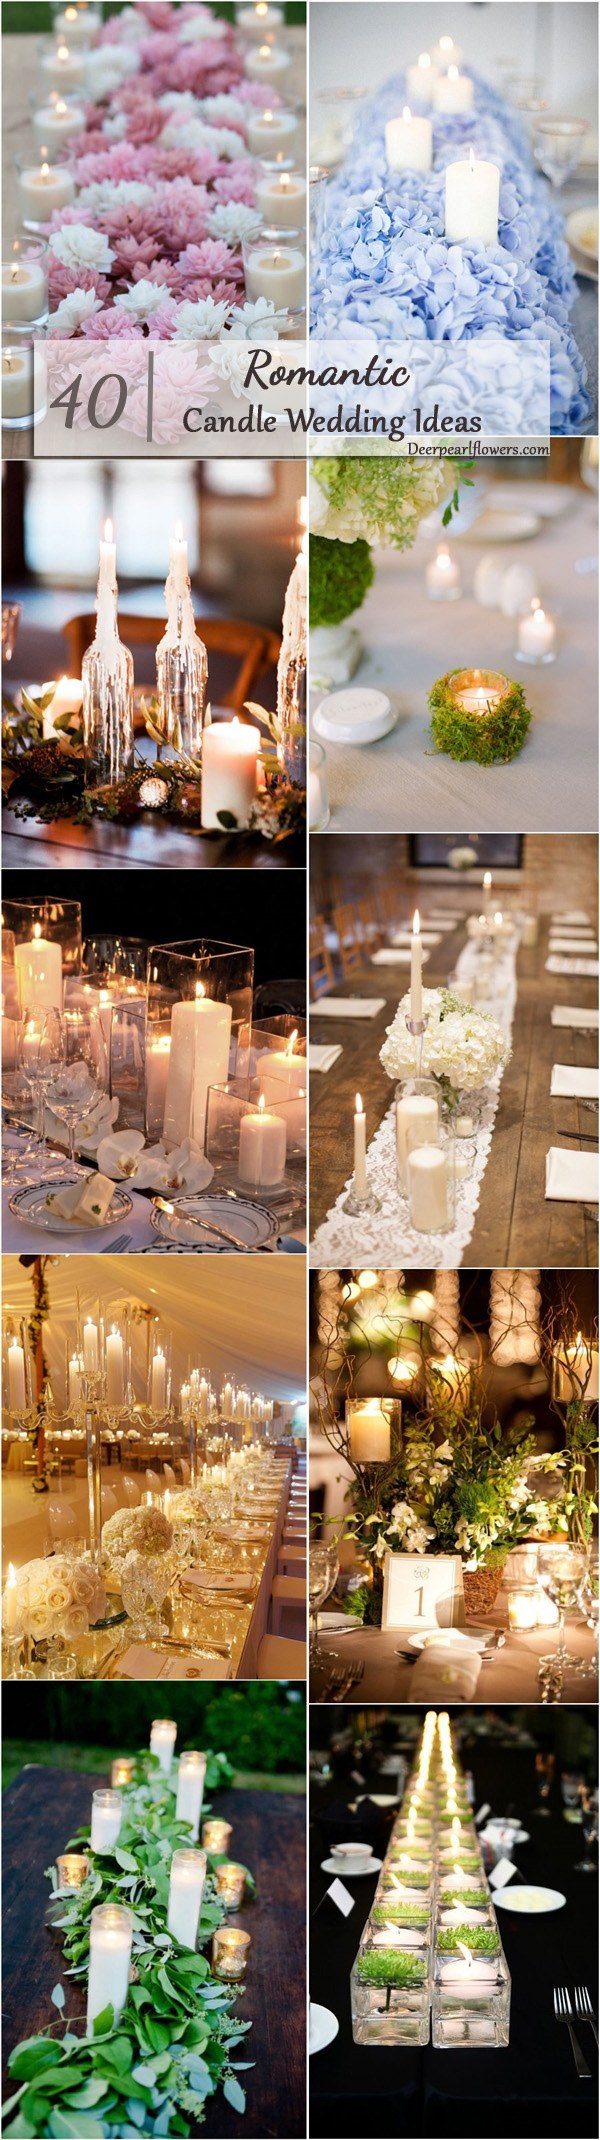 rustic wedding decor ideas with candles